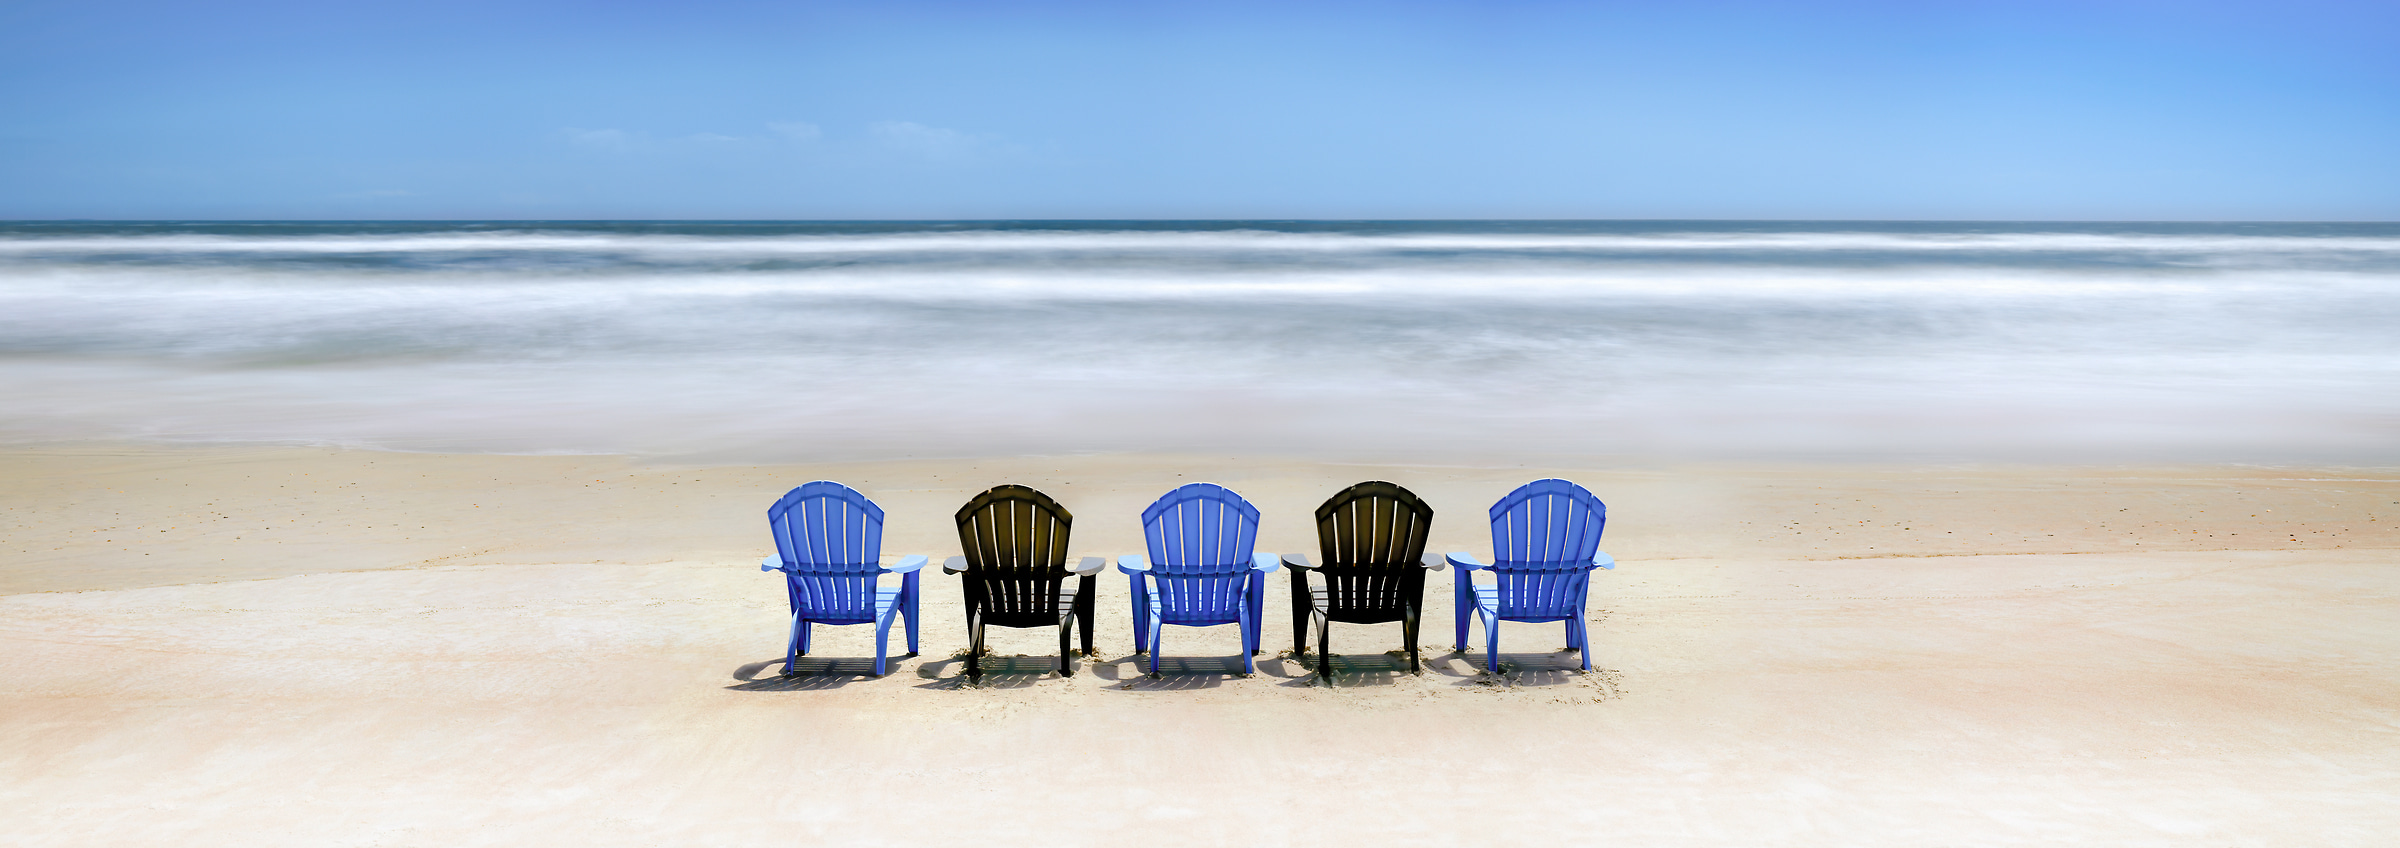 236 megapixels! A very high resolution, large-format VAST photo print of beach chairs on the sand; photograph created by Phil Crawshay in Vilano Beach, St Augustine, Florida